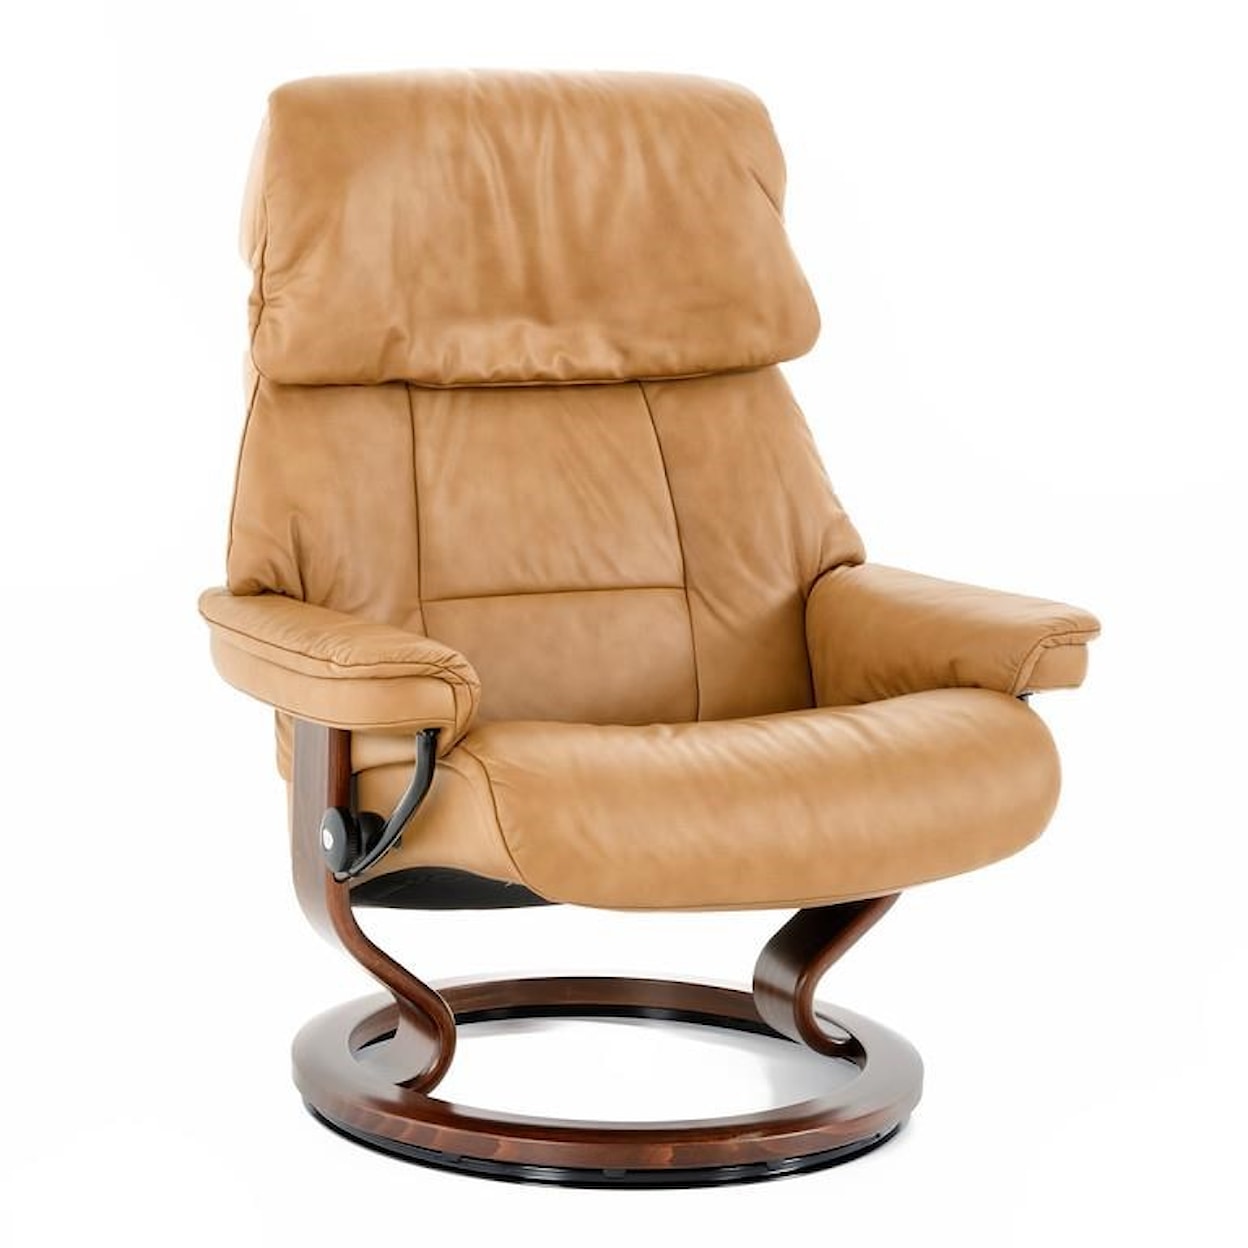 Stressless Stressless Ruby Large Classic Chair